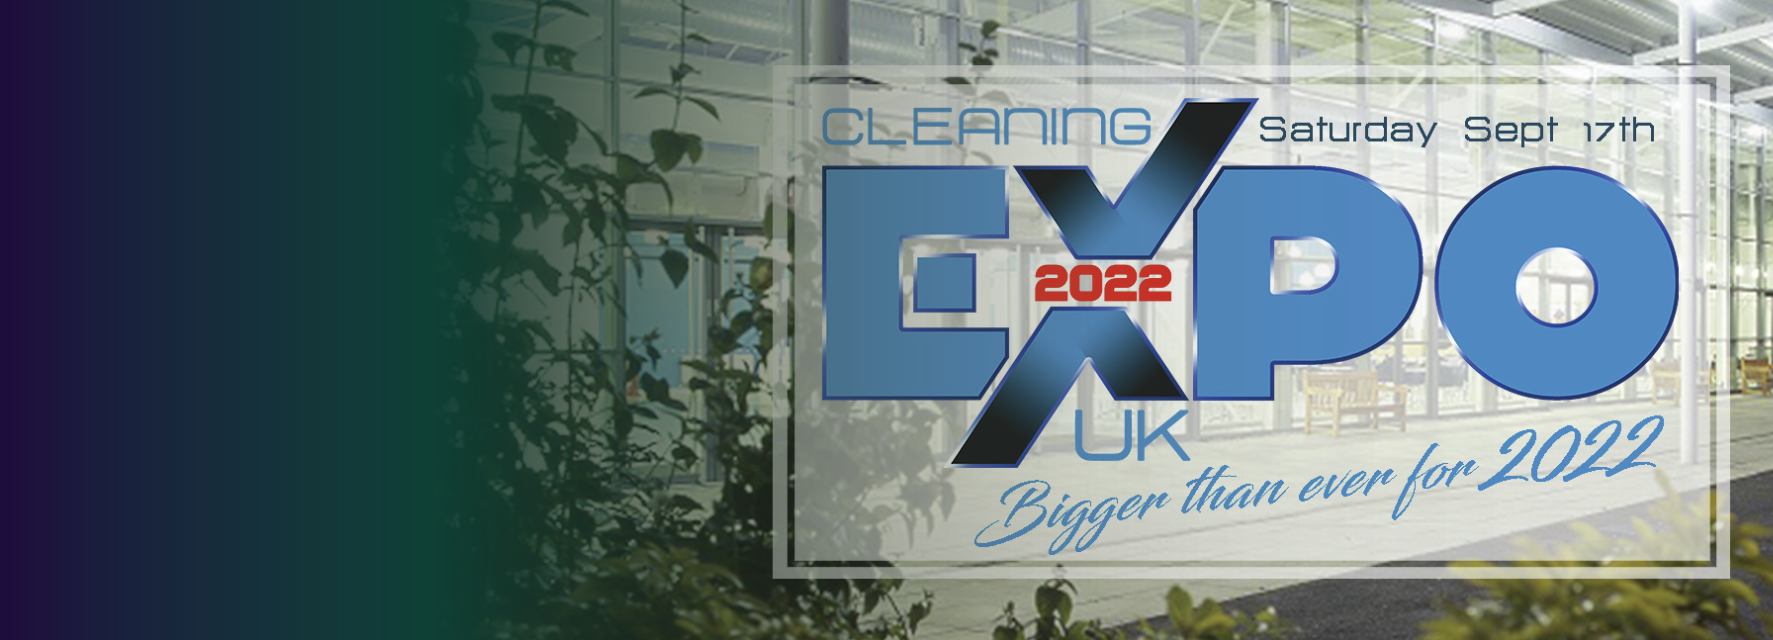 SQUEEGEE is exhibiting at The Cleaning Expo 2022